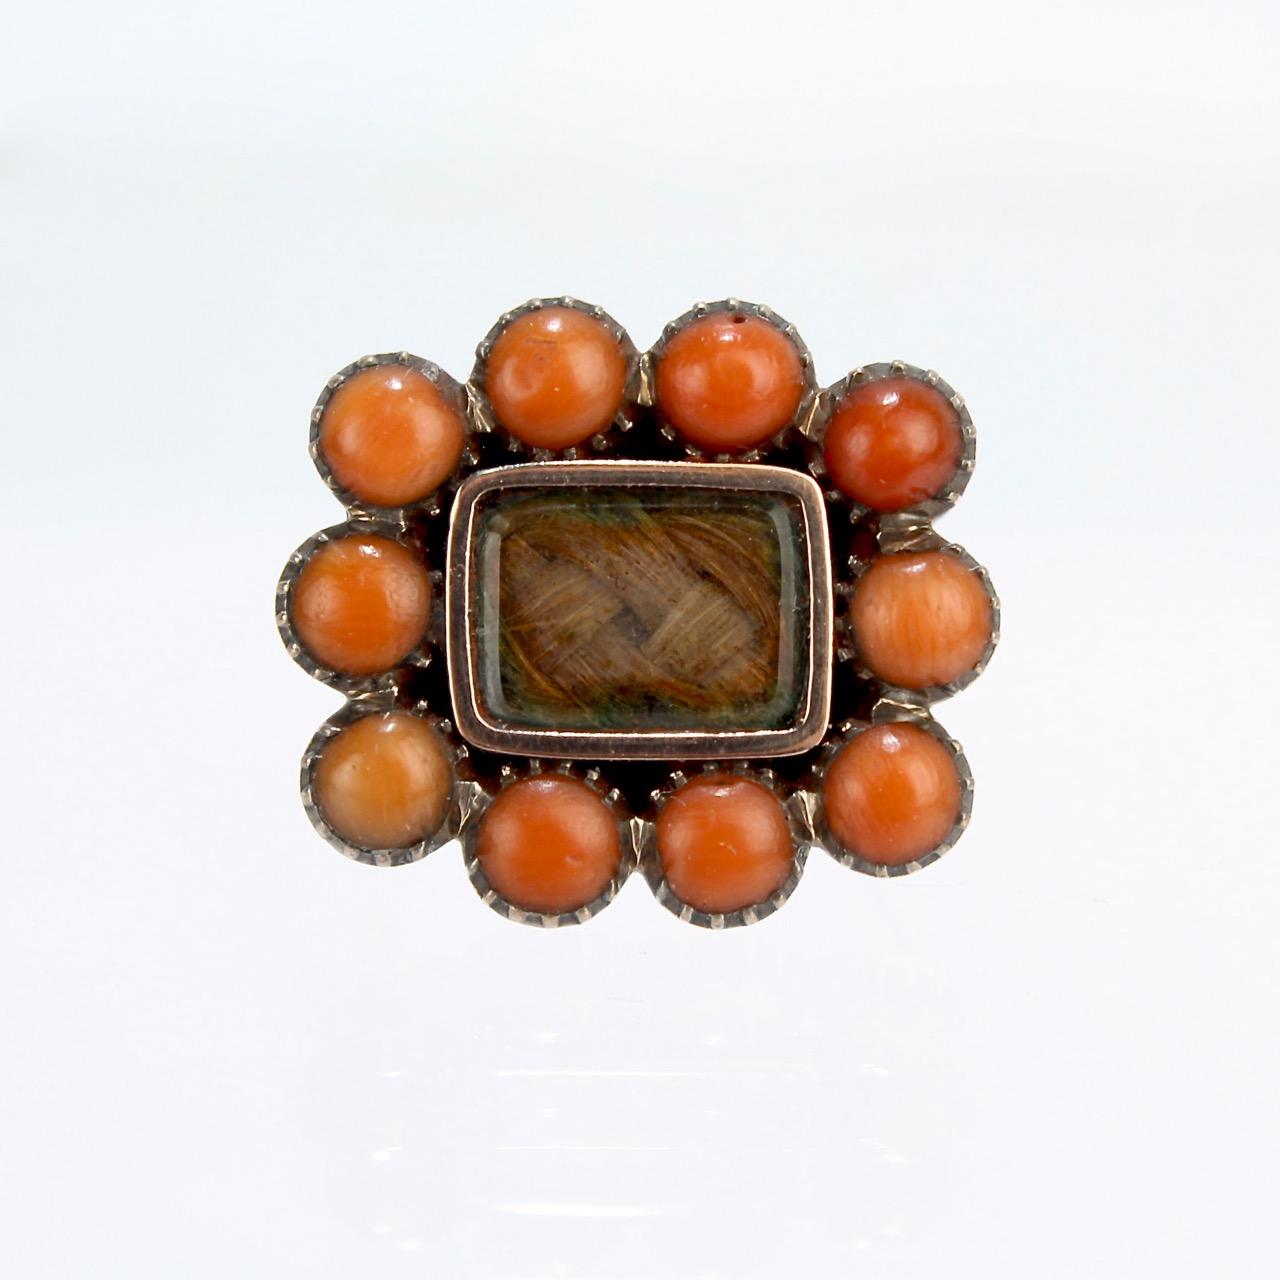 A wonderful, diminutive Georgian or early Victorian gold-filled and woven hair brooch or pin.

With braided hair behind glass set in a gold-filled setting surrounded by small pink coral cabochons. 

In the Georgian and Victorian eras, woven hair art